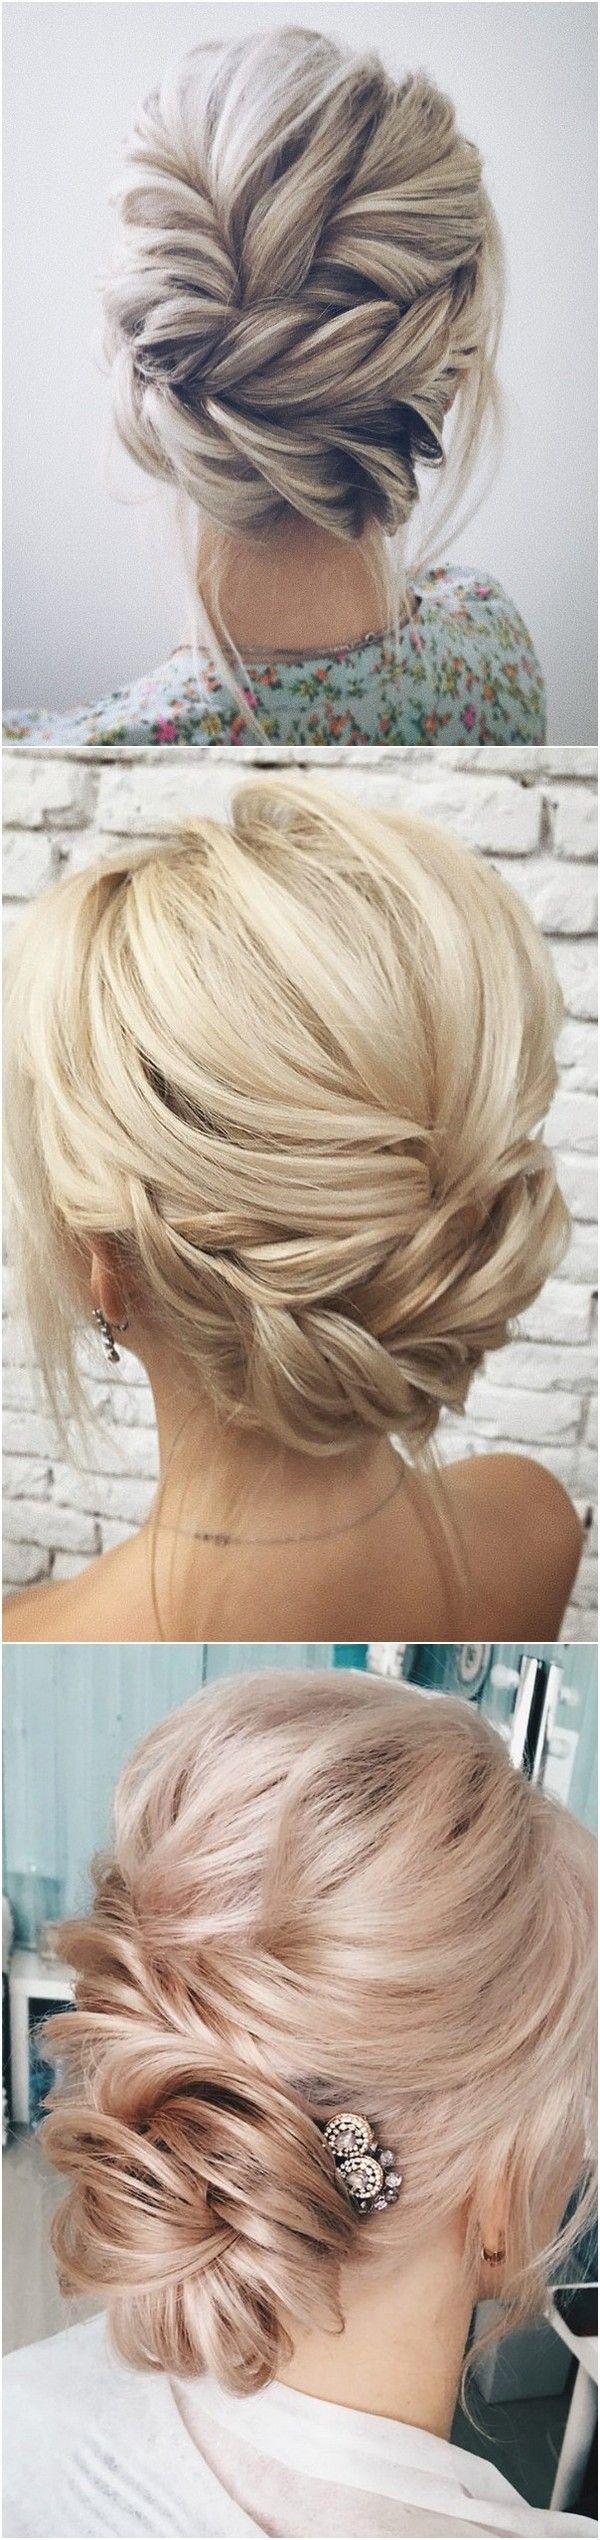 Mariage - 12 Trending Updo Wedding Hairstyles From Instagram - Page 2 Of 2